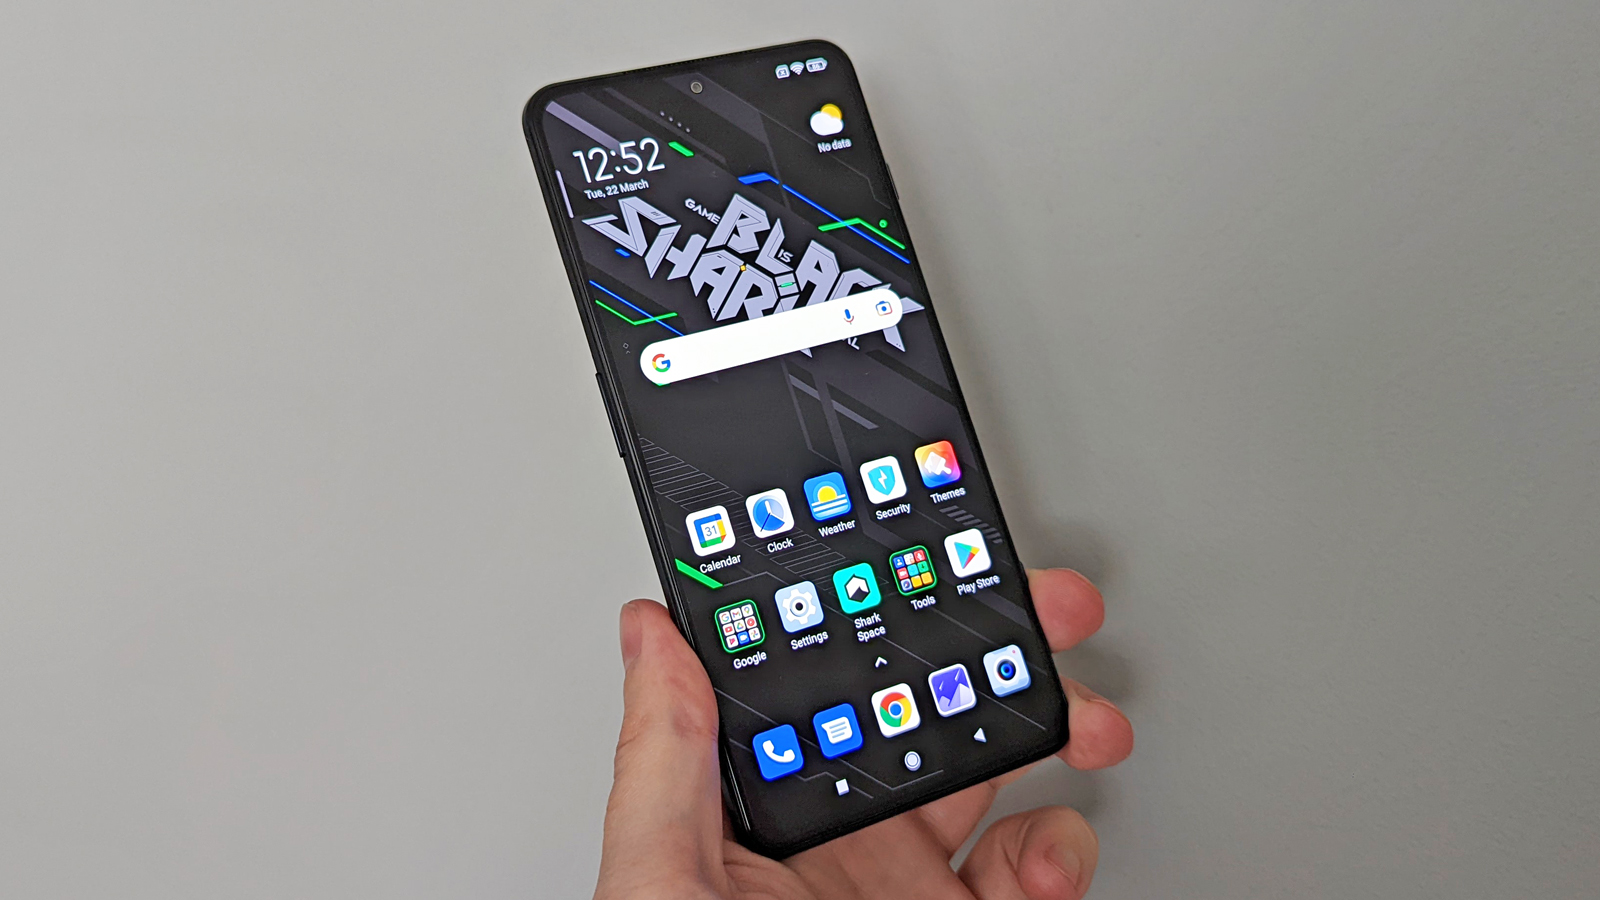 Xiaomi Black Shark 4 Pro being held in a hand, showing the front